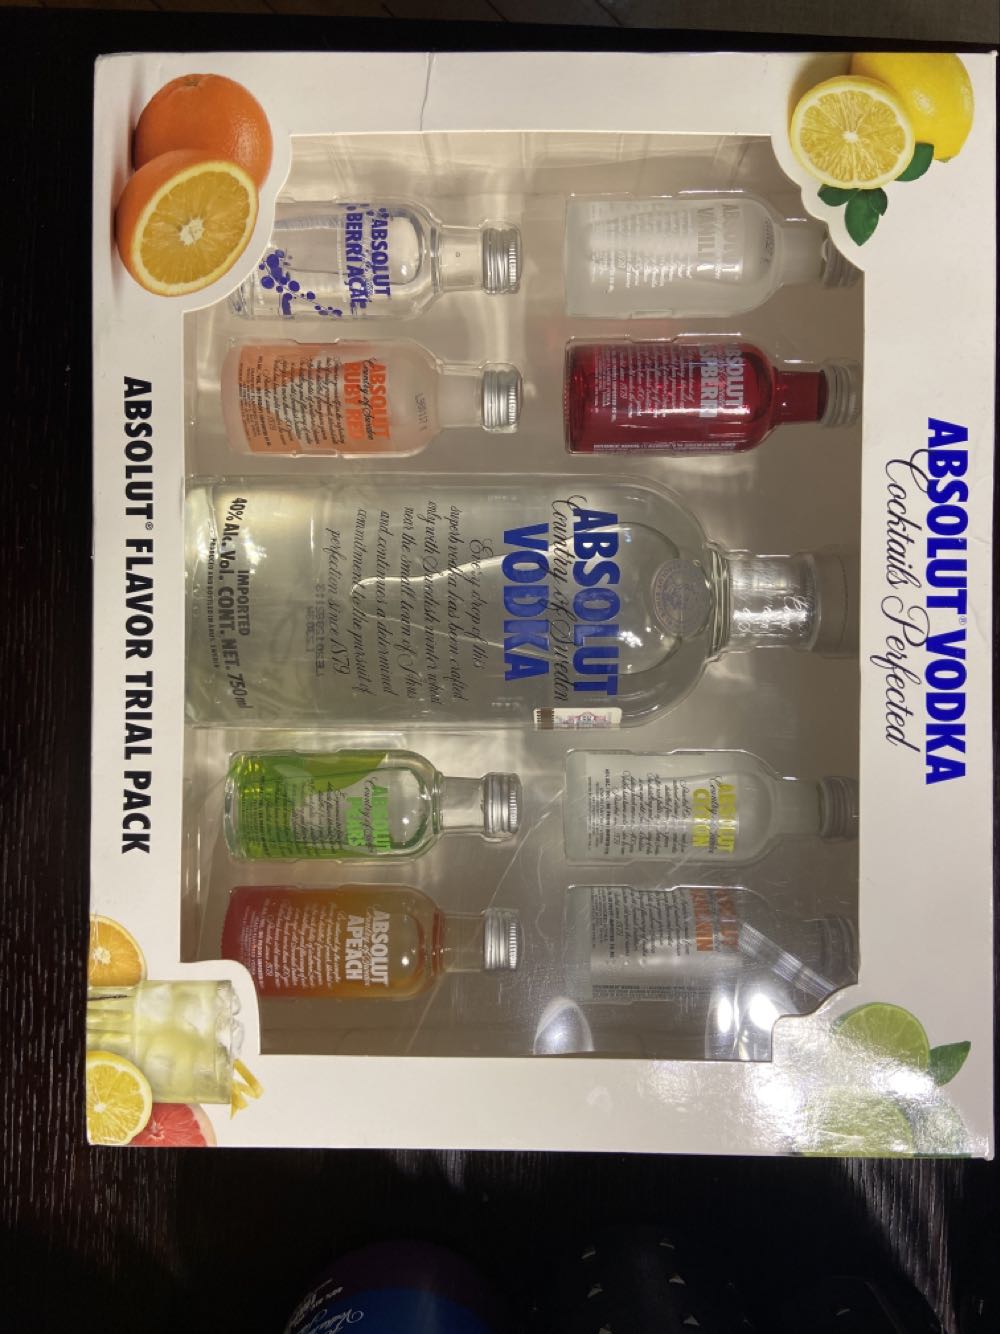 Absolut Box Flavor Trial Pack - The Absolut Company AB alcohol collectible [Barcode 080432106921] - Main Image 1